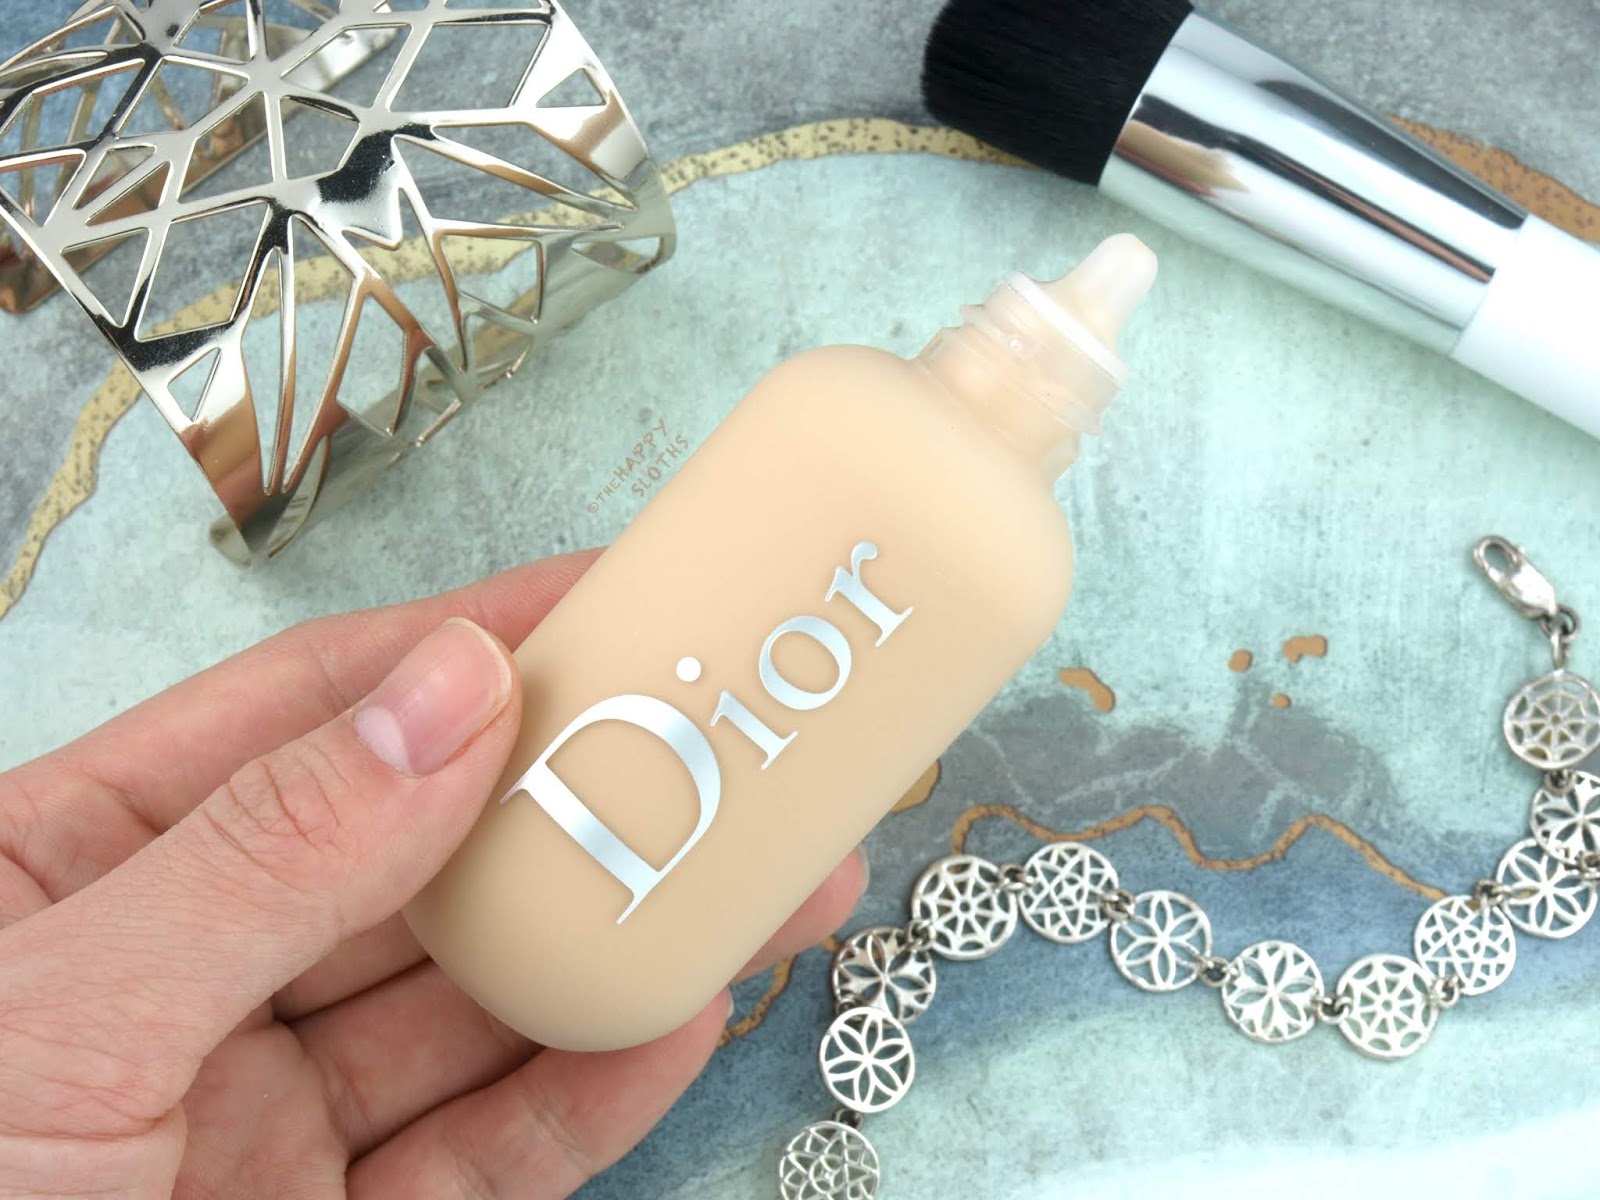 Dior | Backstage Face & Body Foundation: Review and Swatches